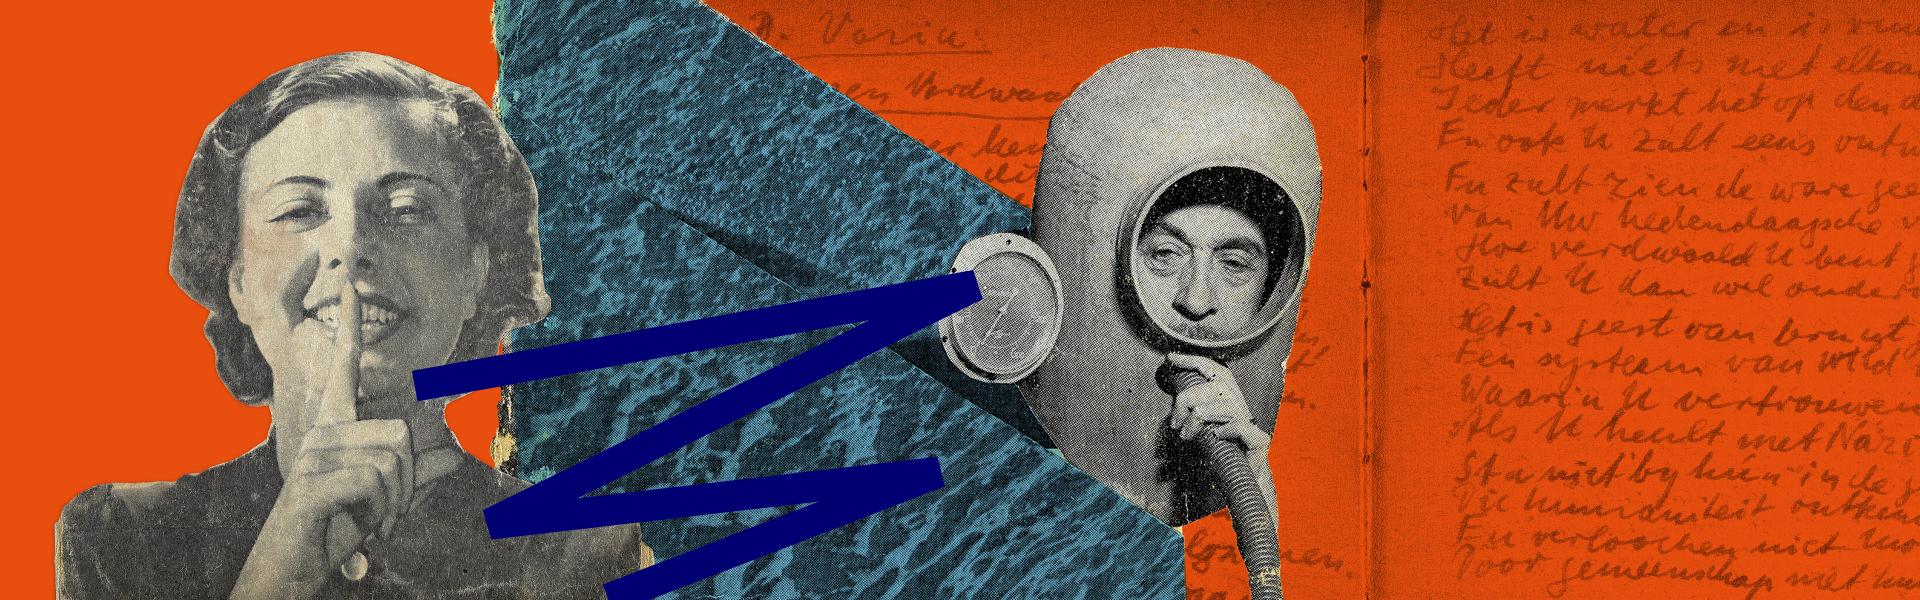 Collage in gray-blue on an orange background with a blue zigzag line: the head of a man in a diving bell, his hand holding a hose, next to it a manometer.